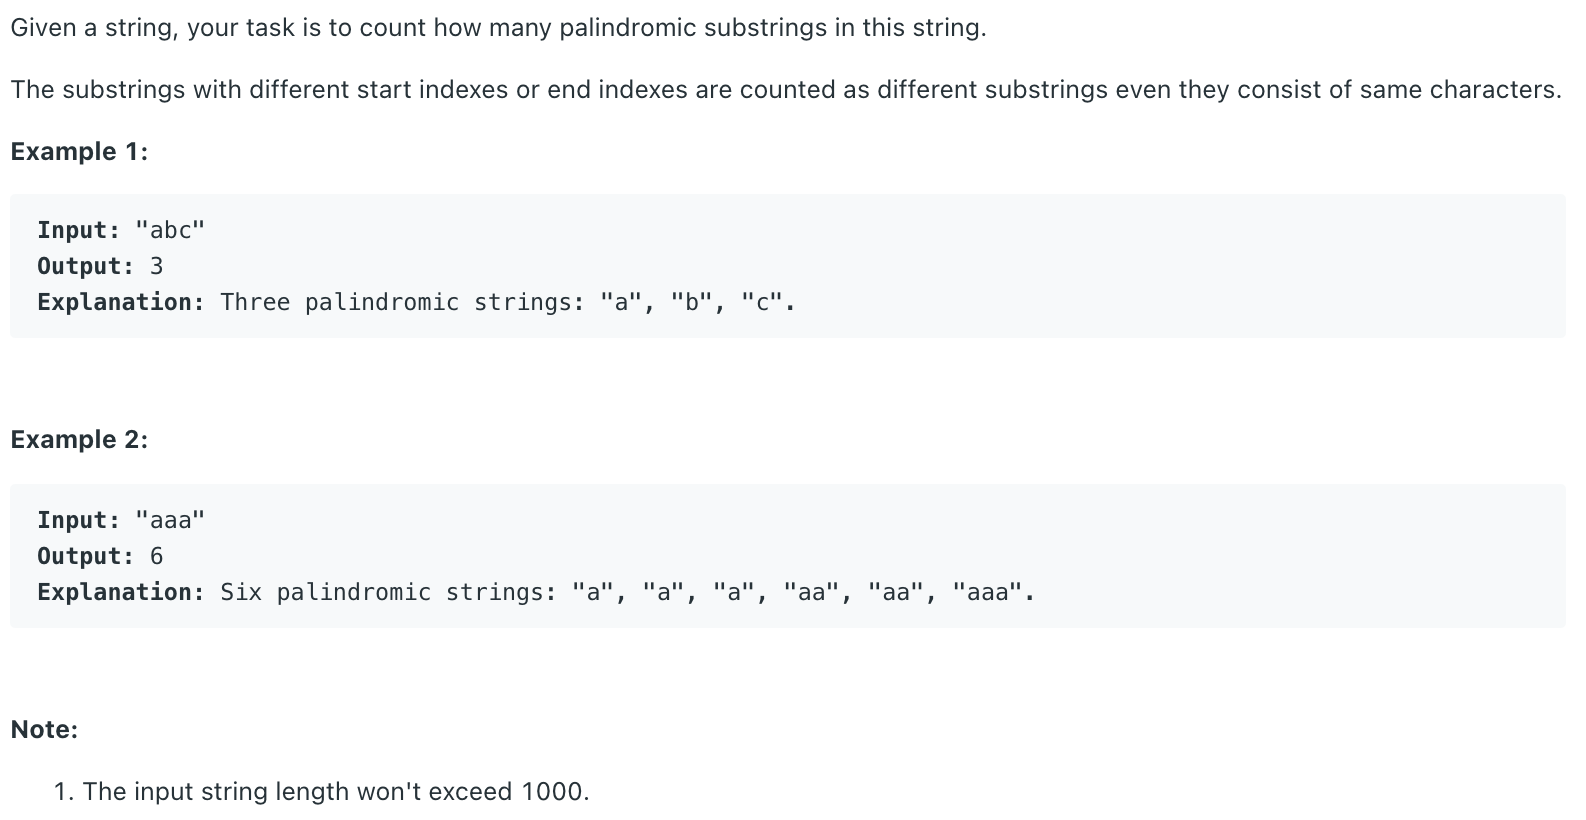 https://leetcode.com/problems/palindromic-substrings